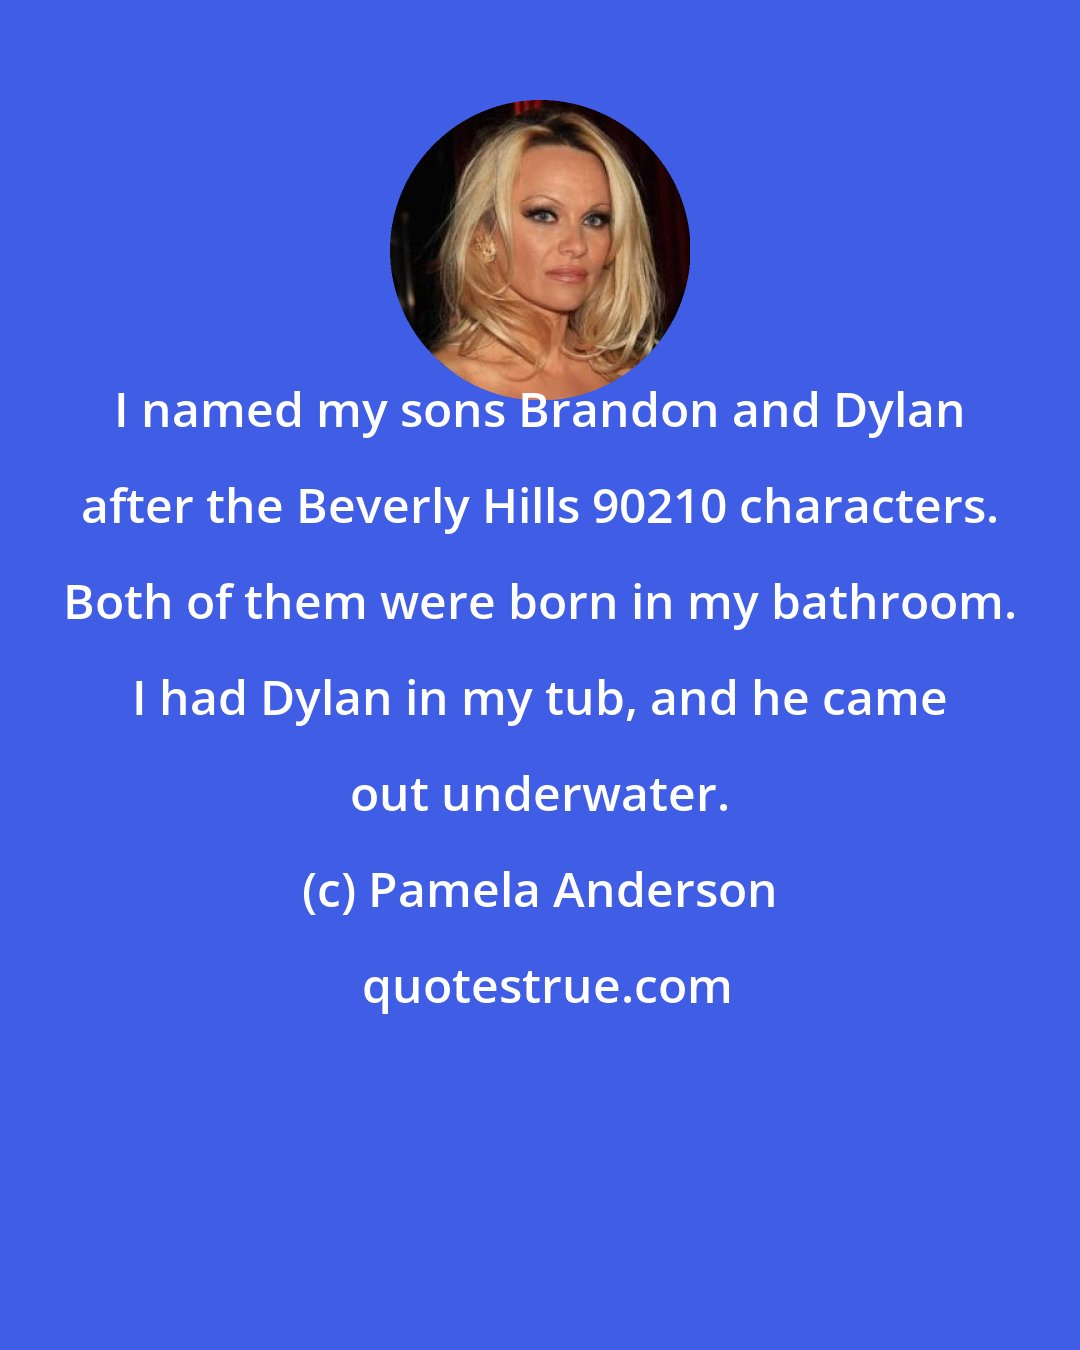 Pamela Anderson: I named my sons Brandon and Dylan after the Beverly Hills 90210 characters. Both of them were born in my bathroom. I had Dylan in my tub, and he came out underwater.